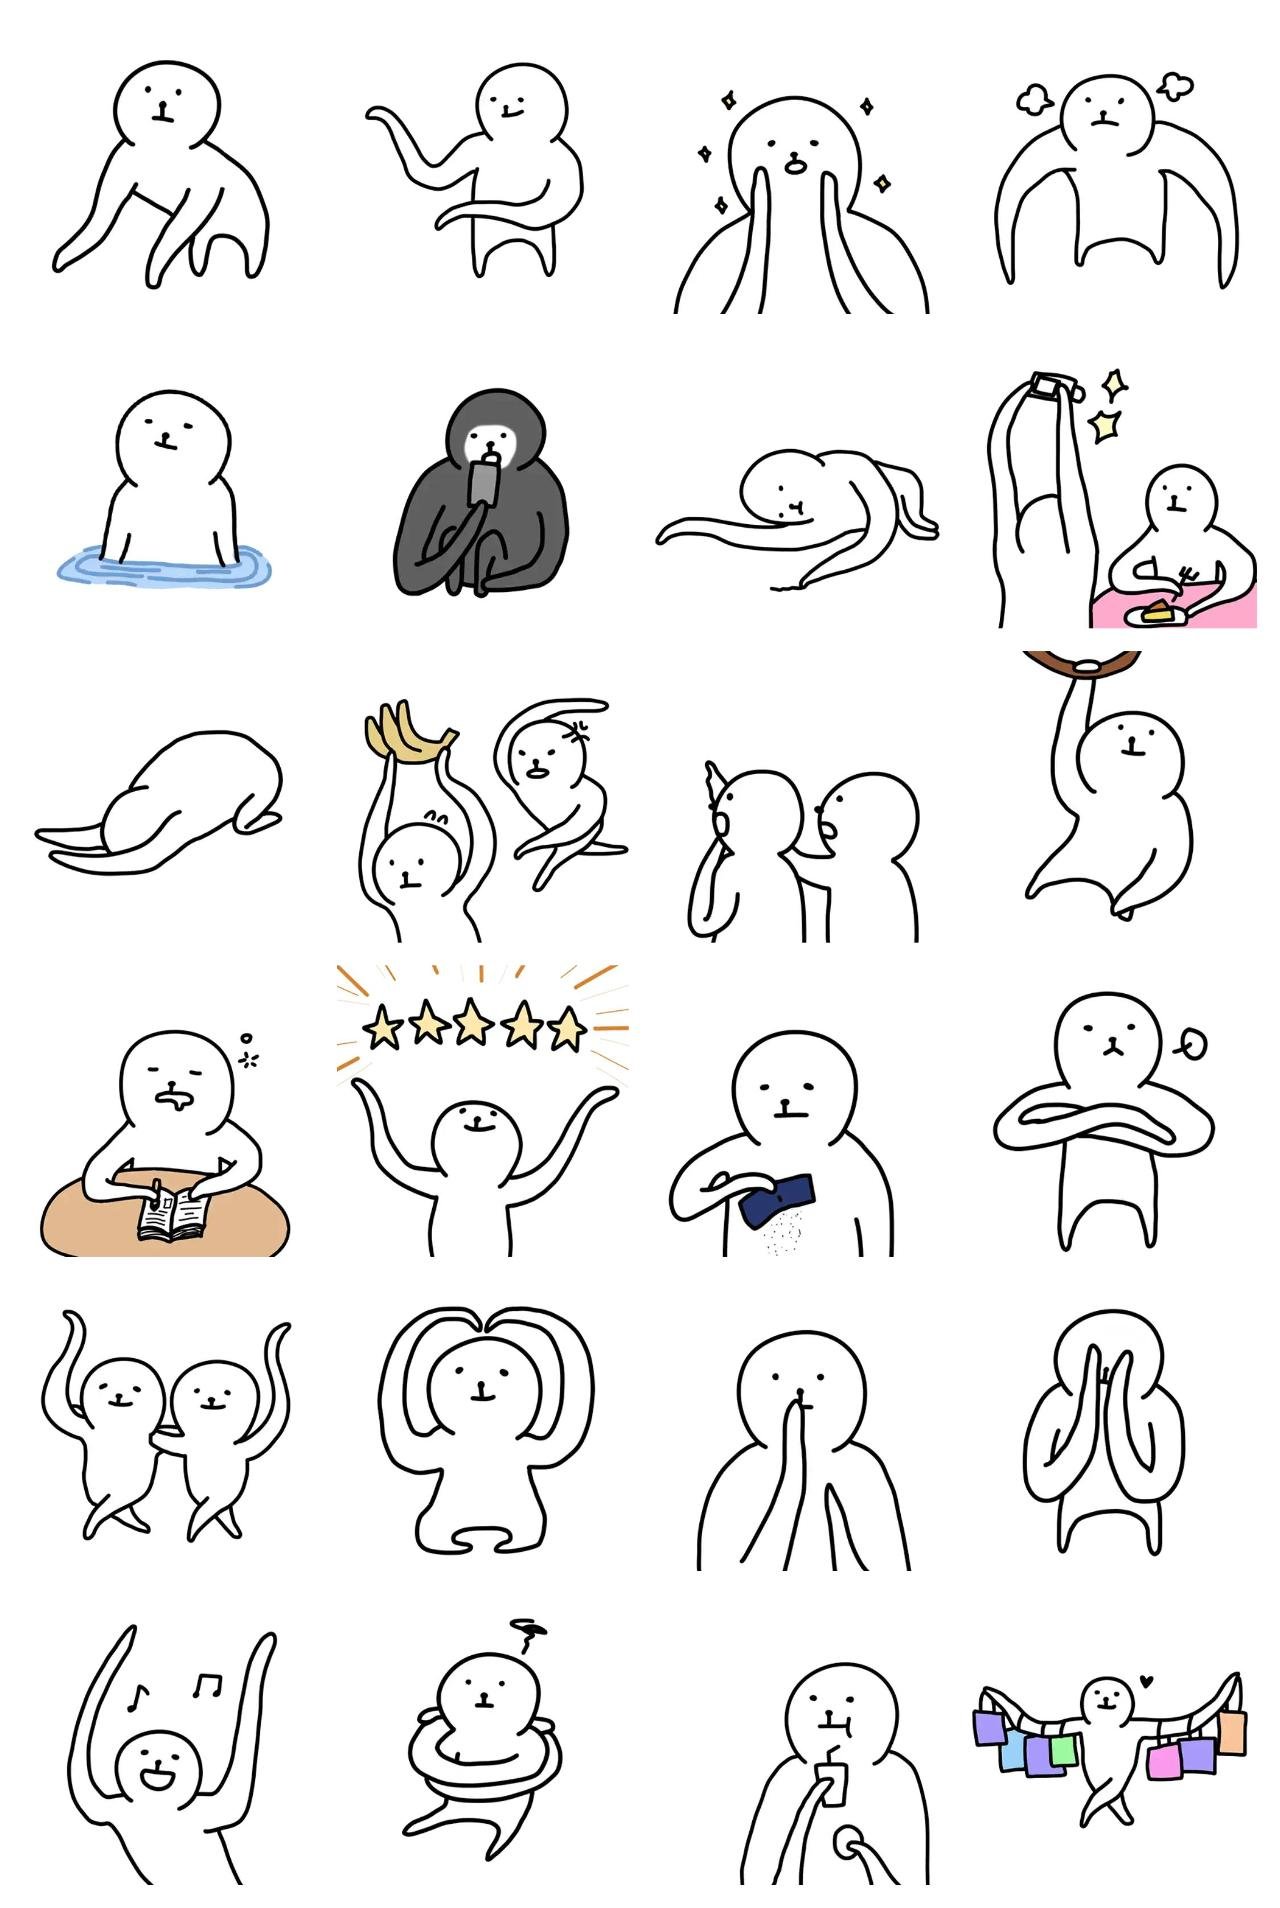 A Cute Sloth Ronnie Animals sticker pack for Whatsapp, Telegram, Signal, and others chatting and message apps